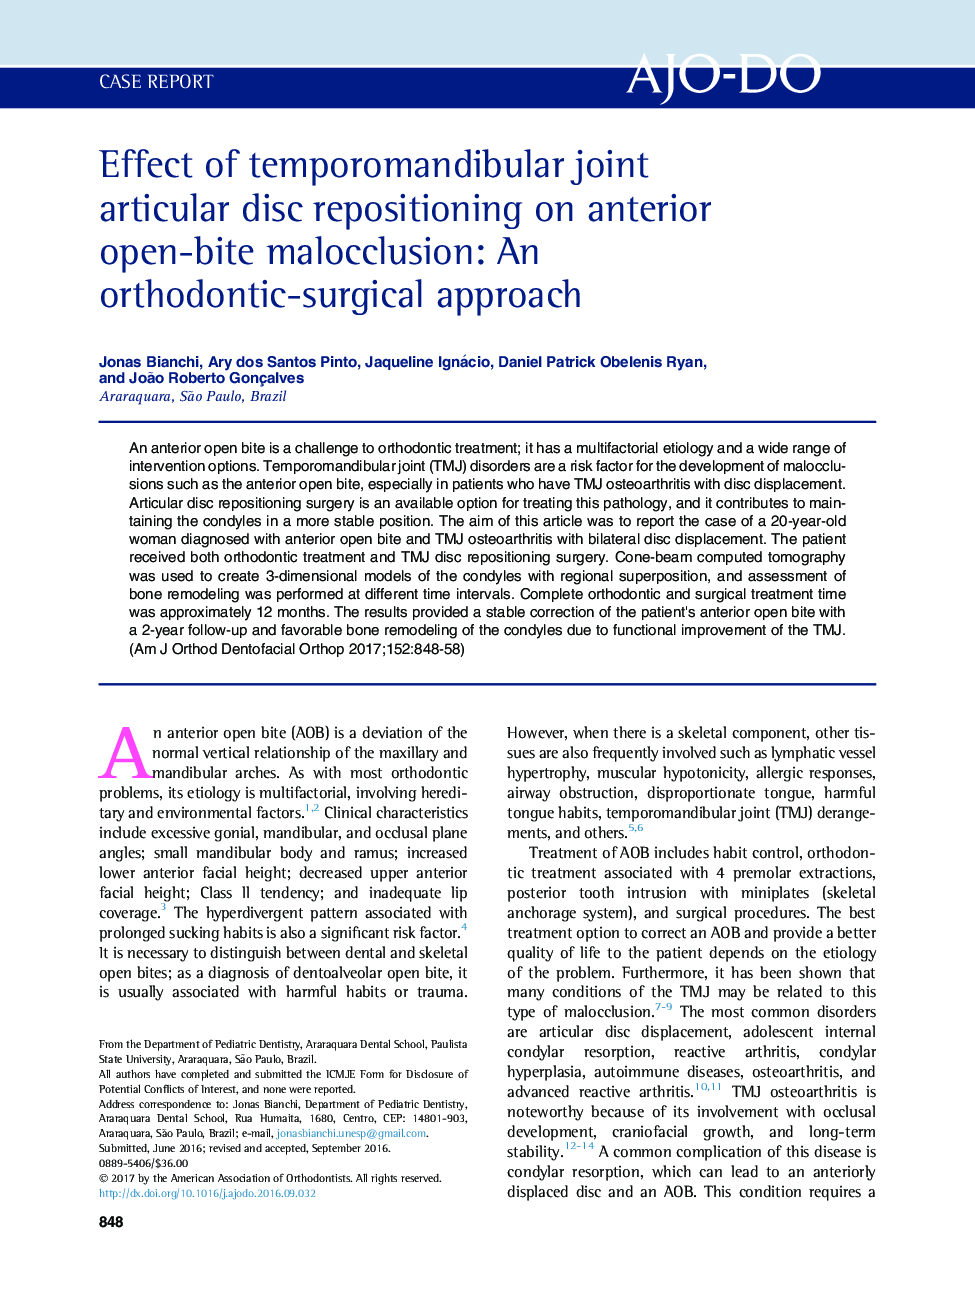 Effect of temporomandibular joint articular disc repositioning on anterior open-bite malocclusion: An orthodontic-surgical approach